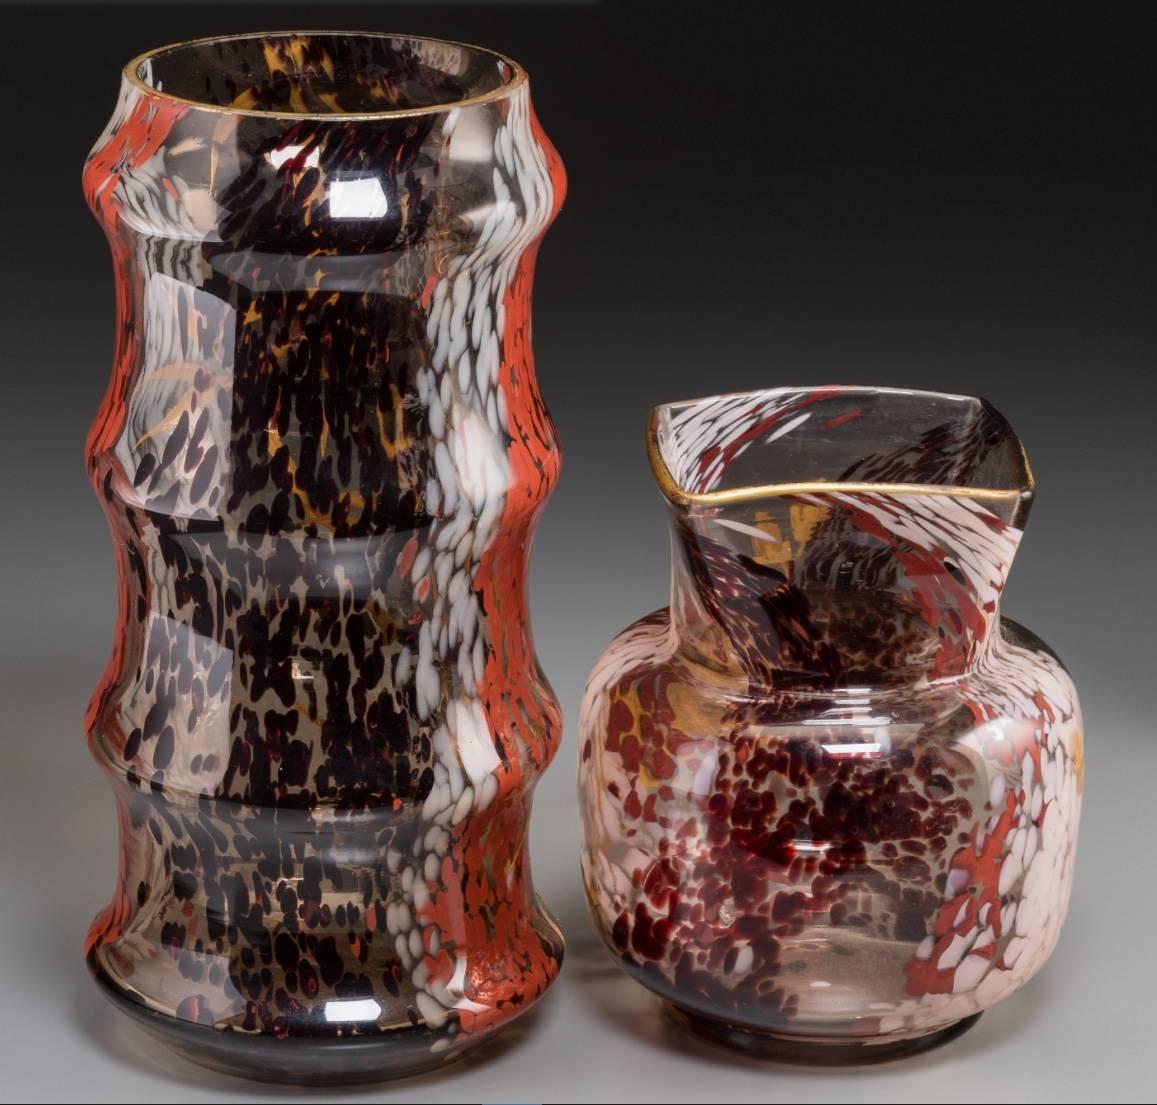 Two Jean Baptiste Ernst-Leveille enameled and mottled glass vases, circa 1900 from the Art Nouveau period in France.

Height 12.5 inches
Width: 6.5 inches 
(31.8 x 15.9 cm) (larger)

Height: 8 inches
Width: 7 inches
(Smaller)

Condition: